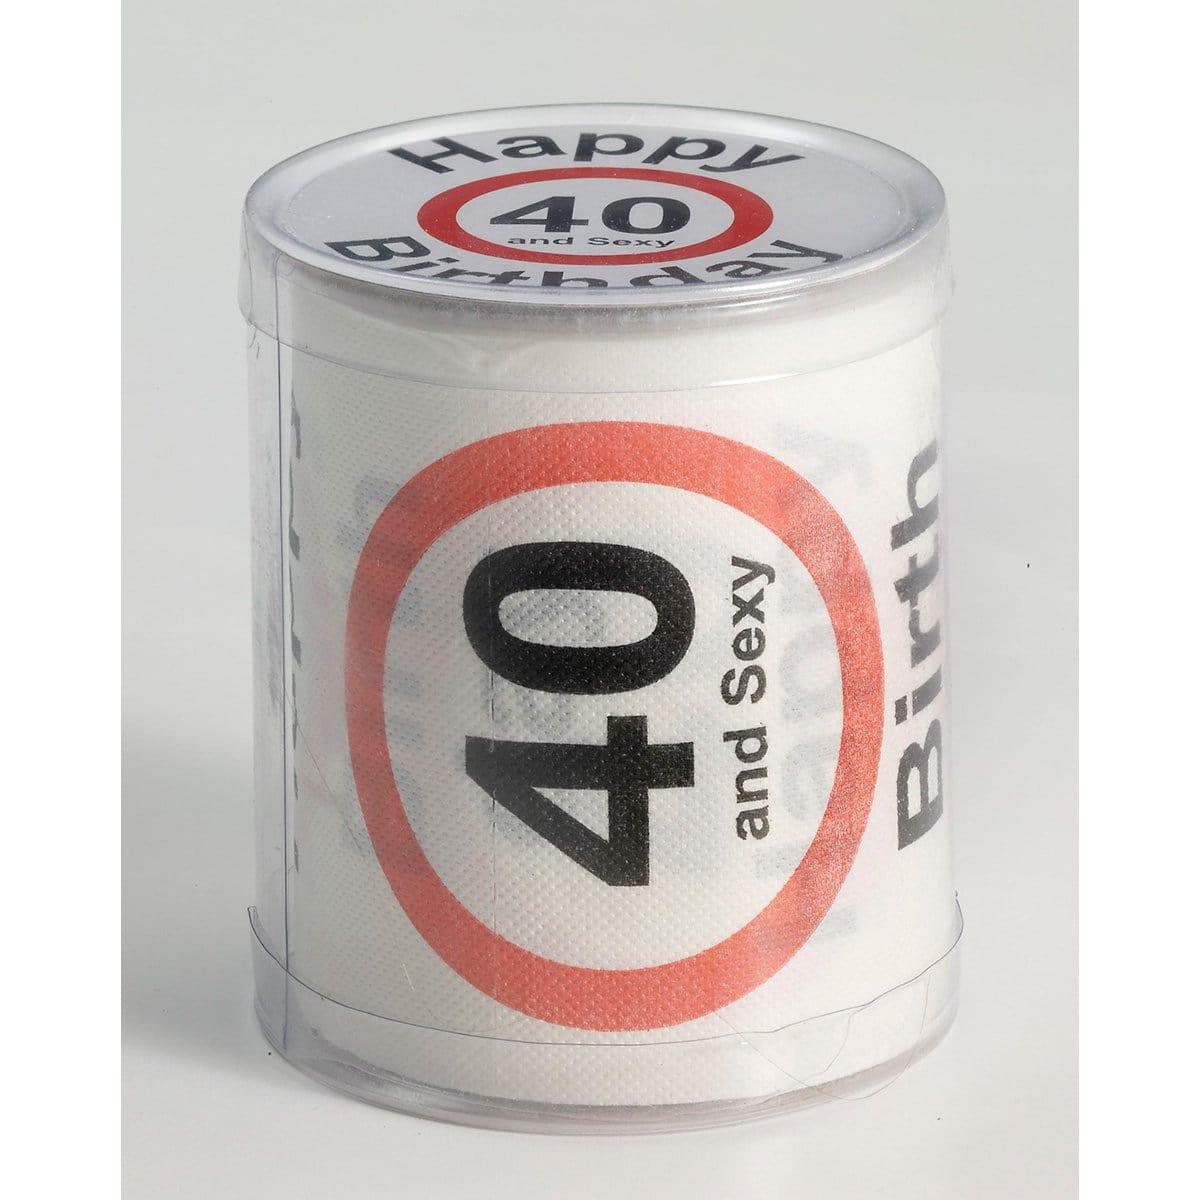 Buy Age Specific Birthday Happy 40th Birthday' Toilet Paper sold at Party Expert